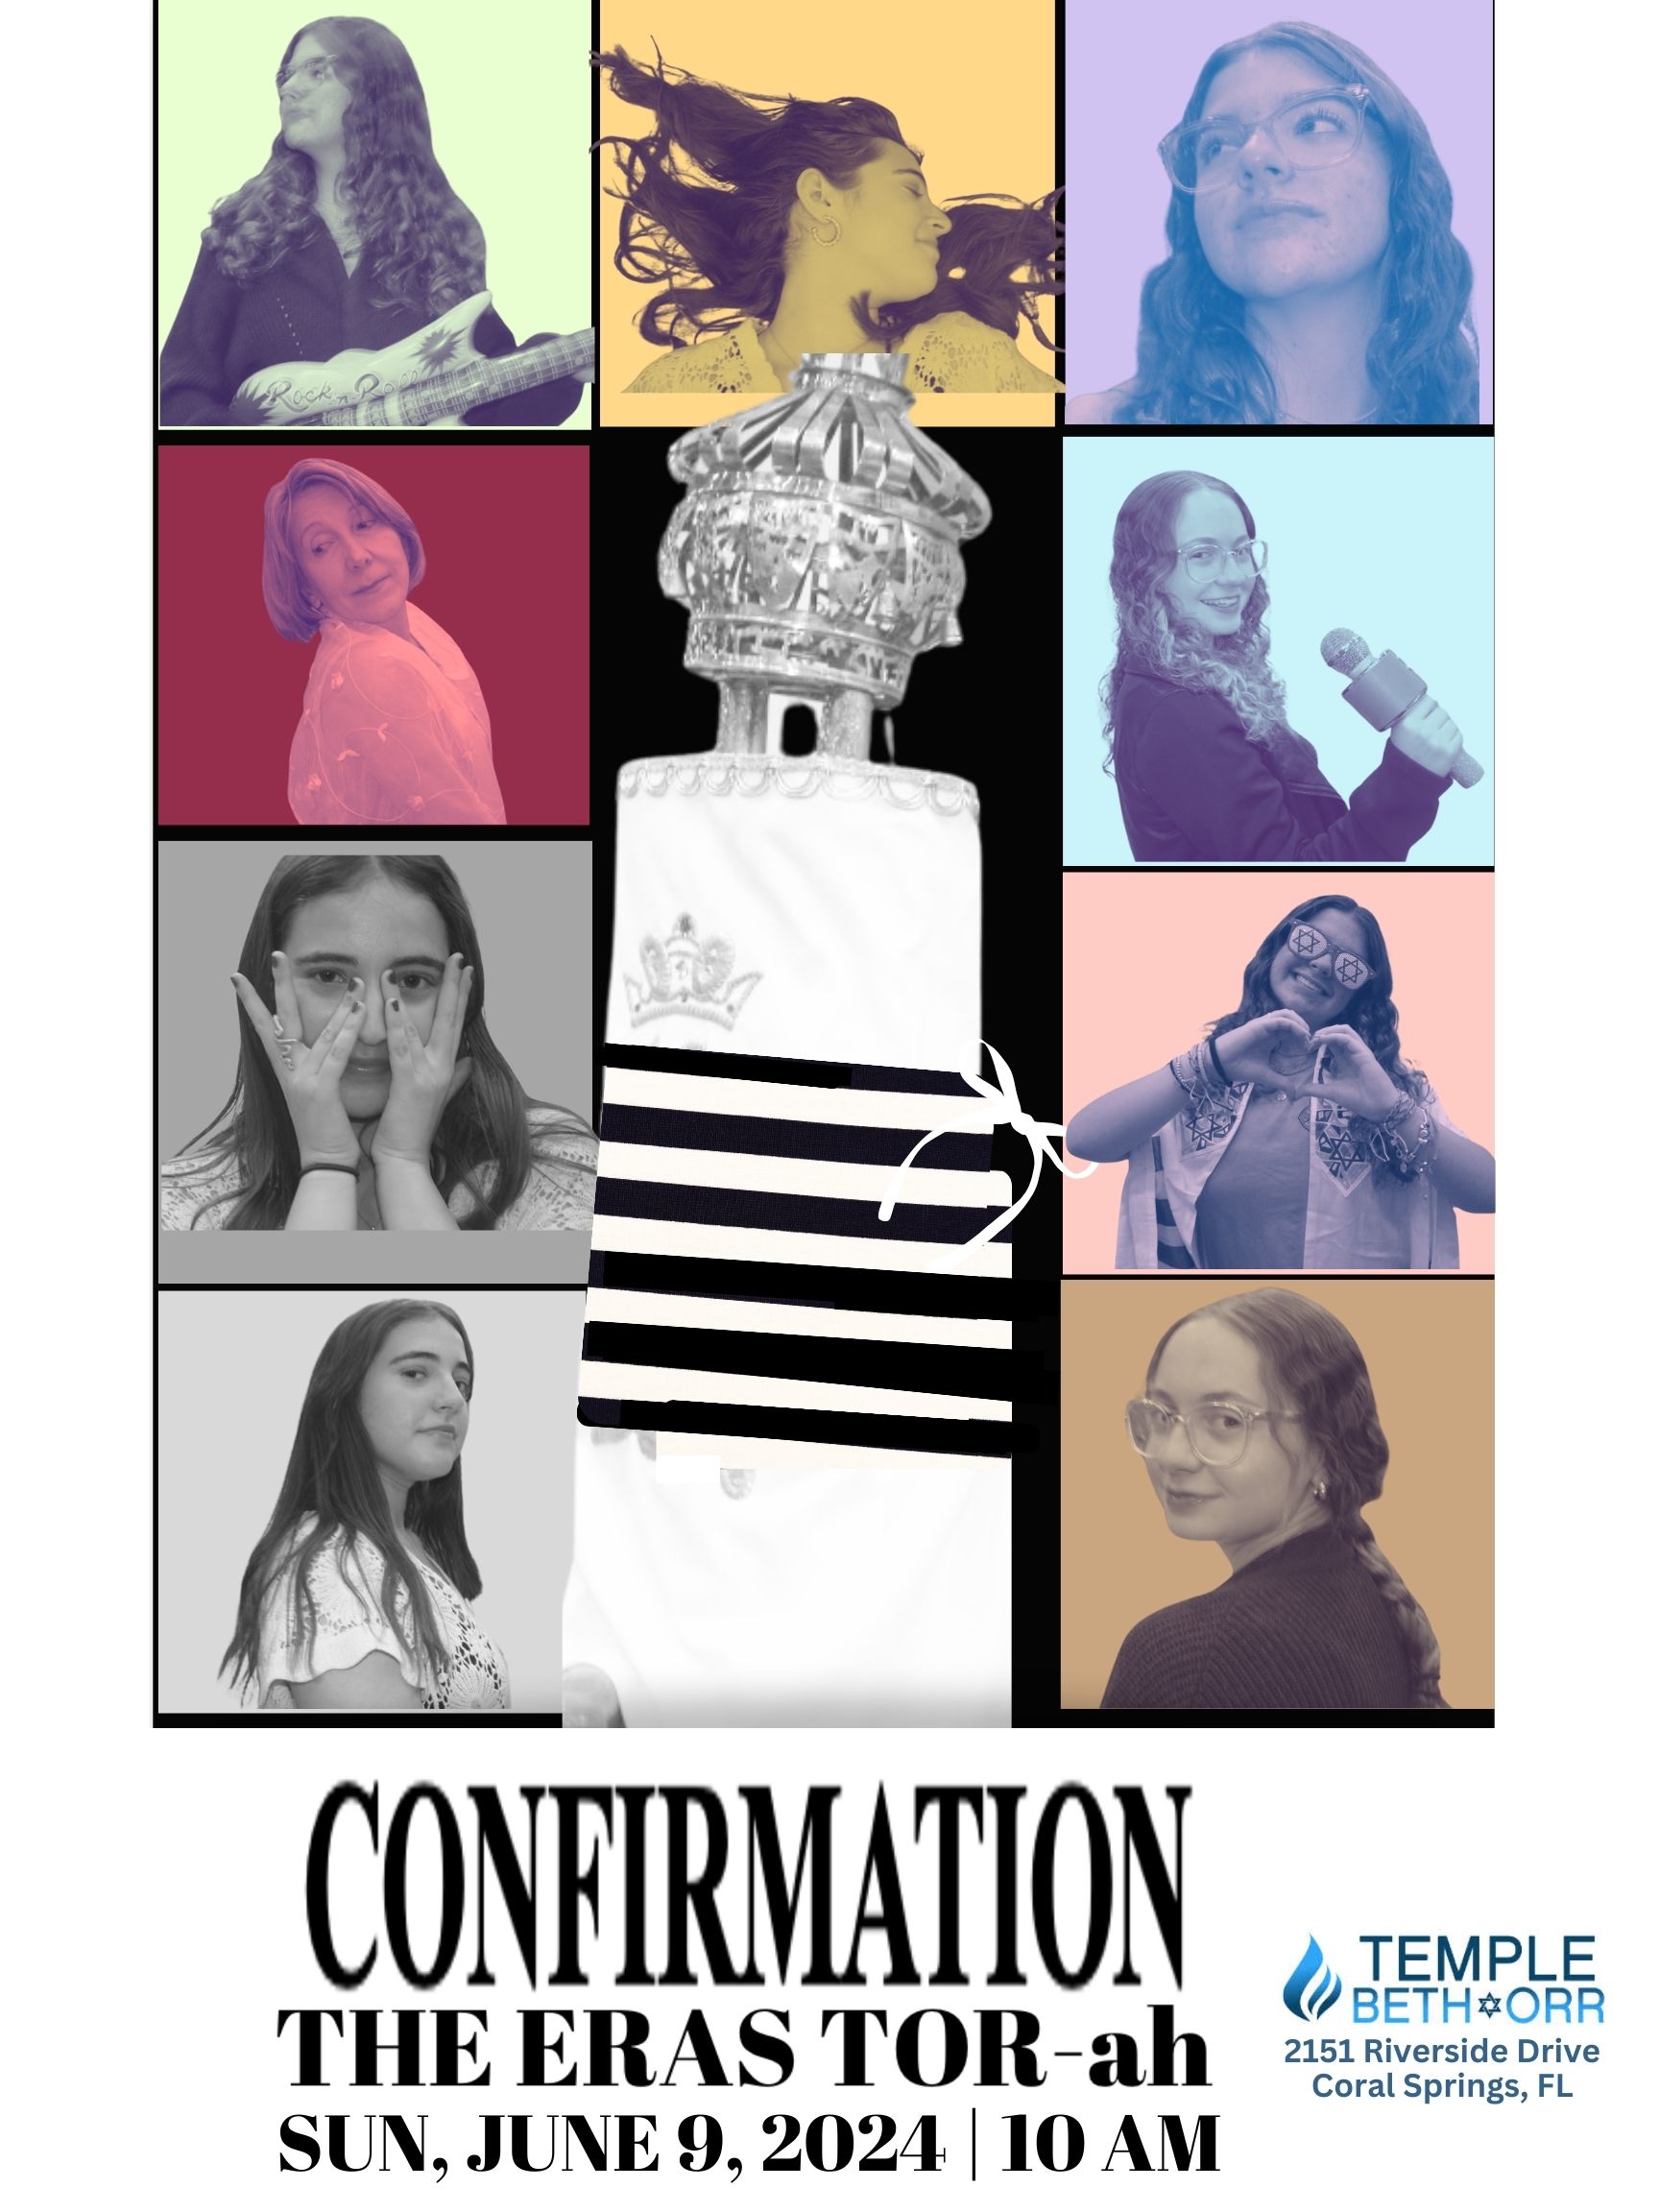 Come to our Confirmation Eras Tor-ah on June 9th!